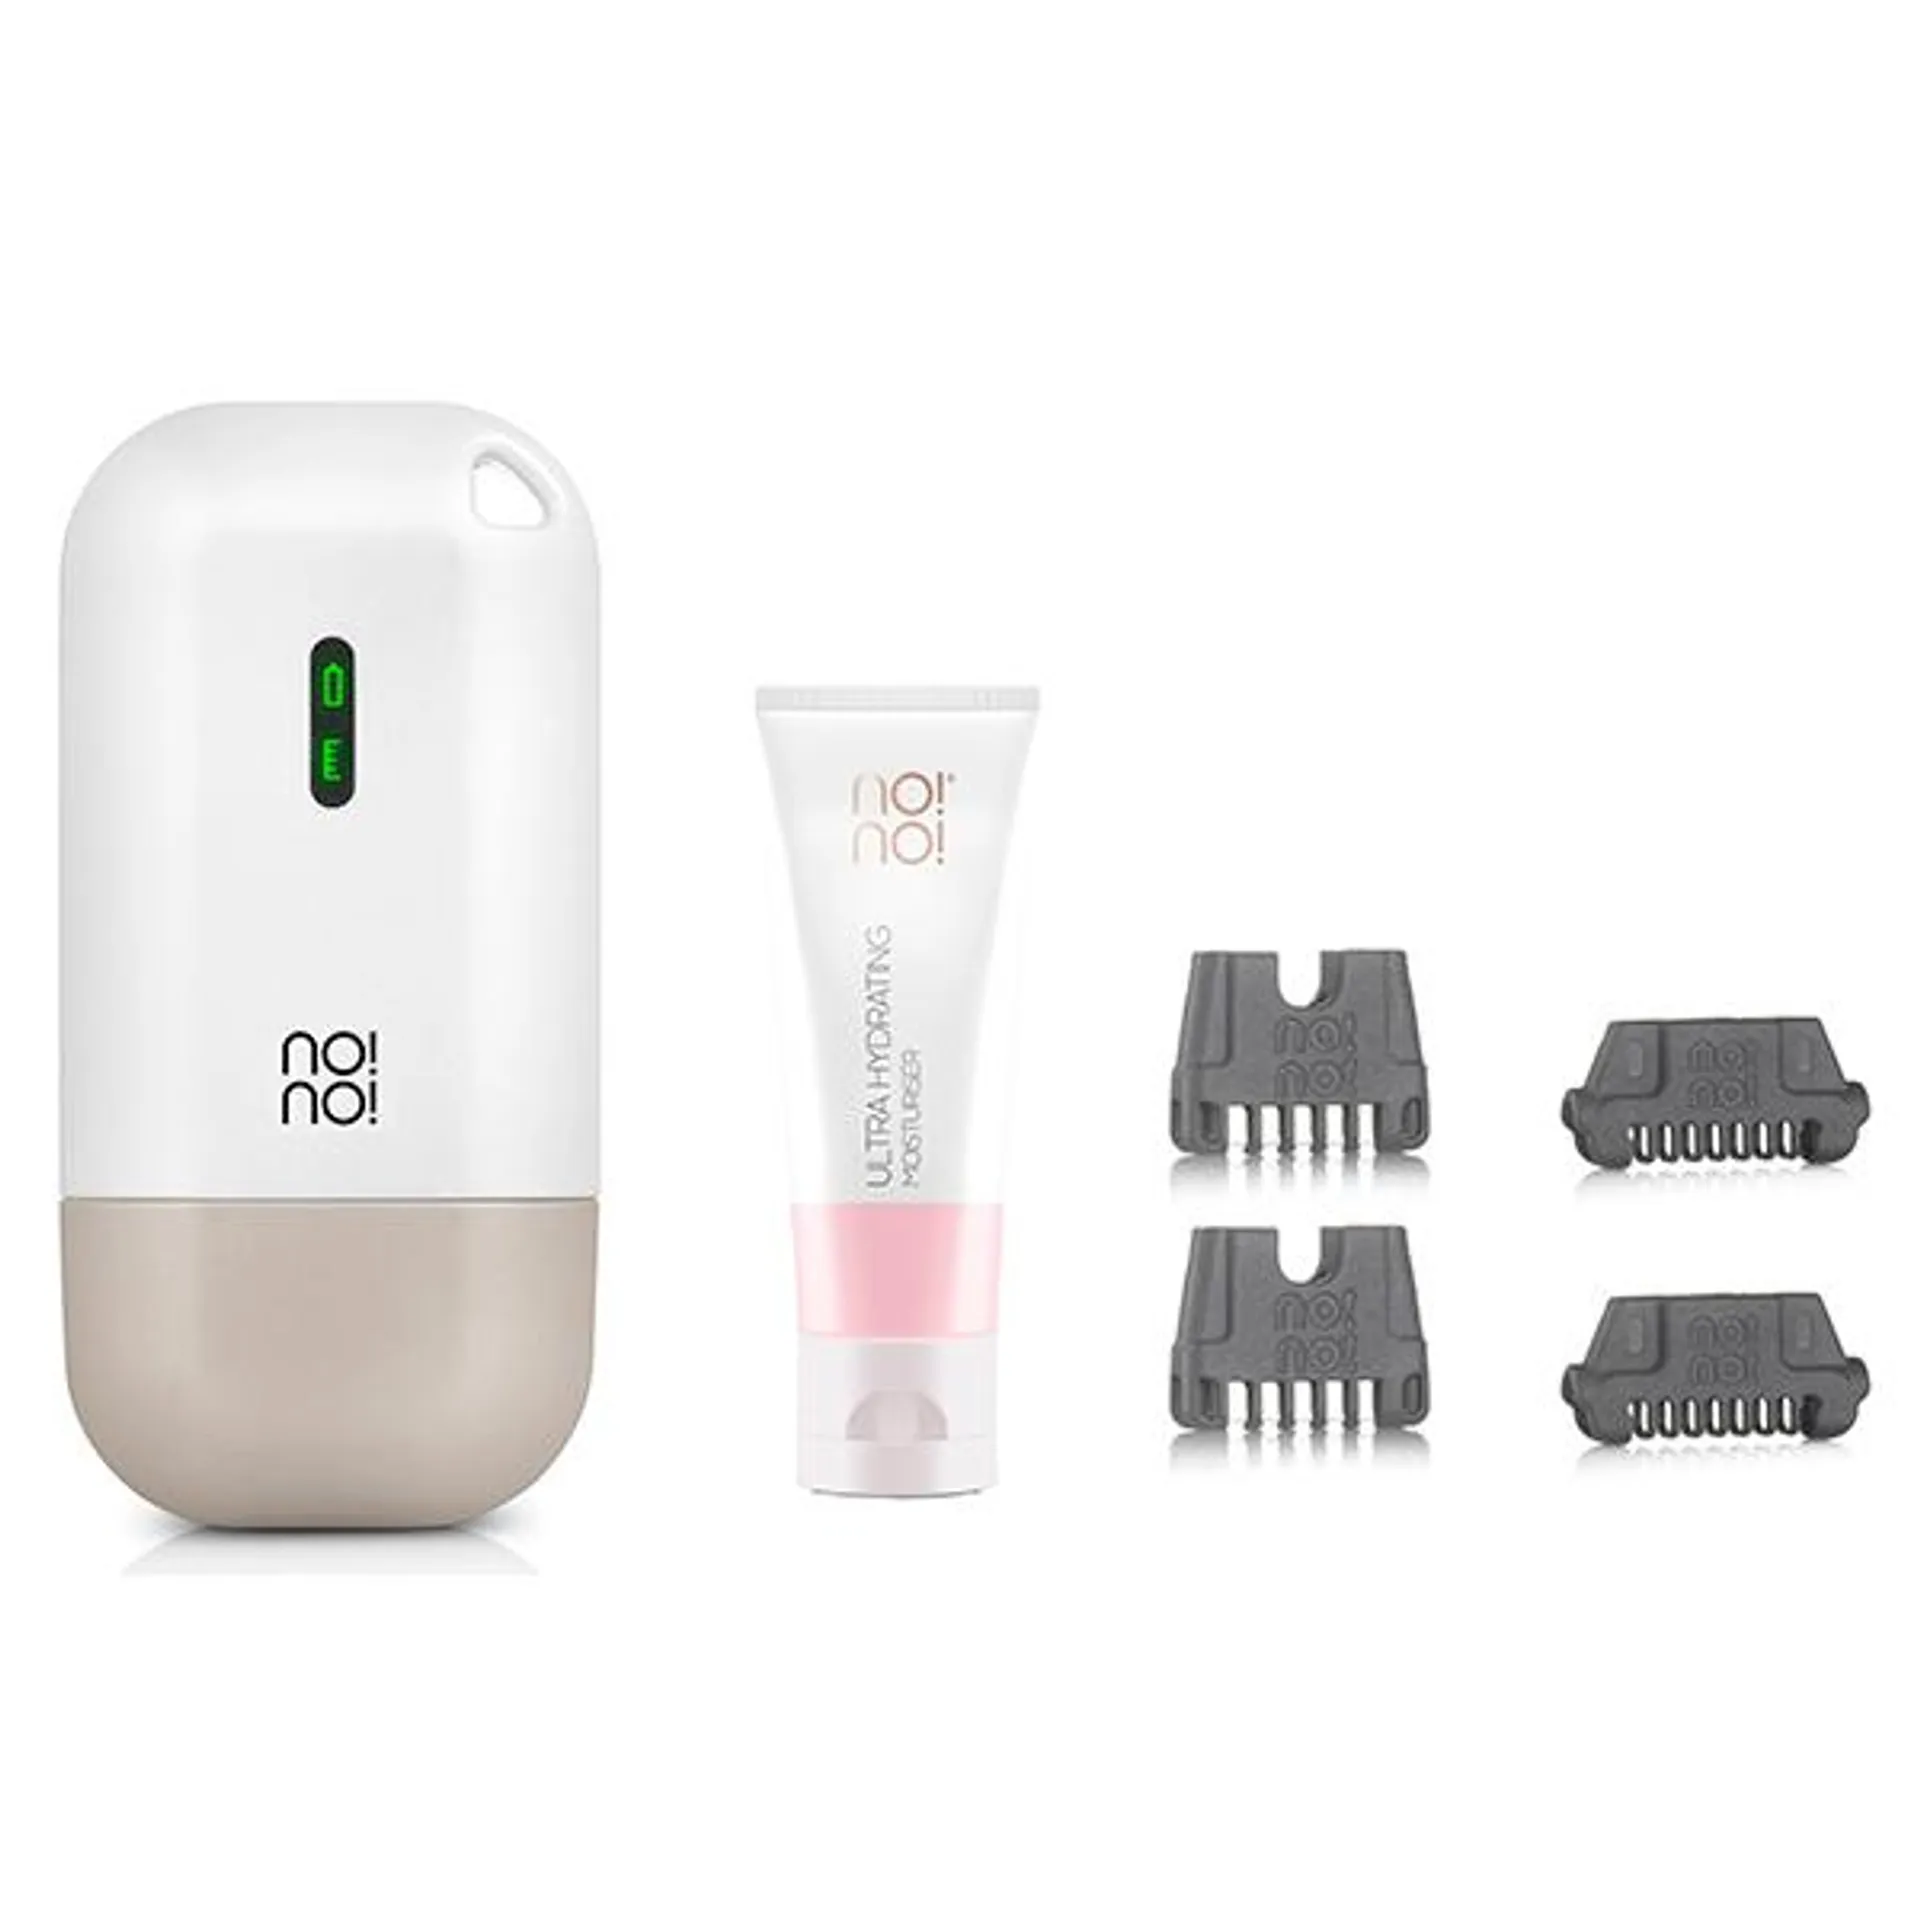 no! no! Micro Hair Removal Collection with Moisturiser and Additional Tips